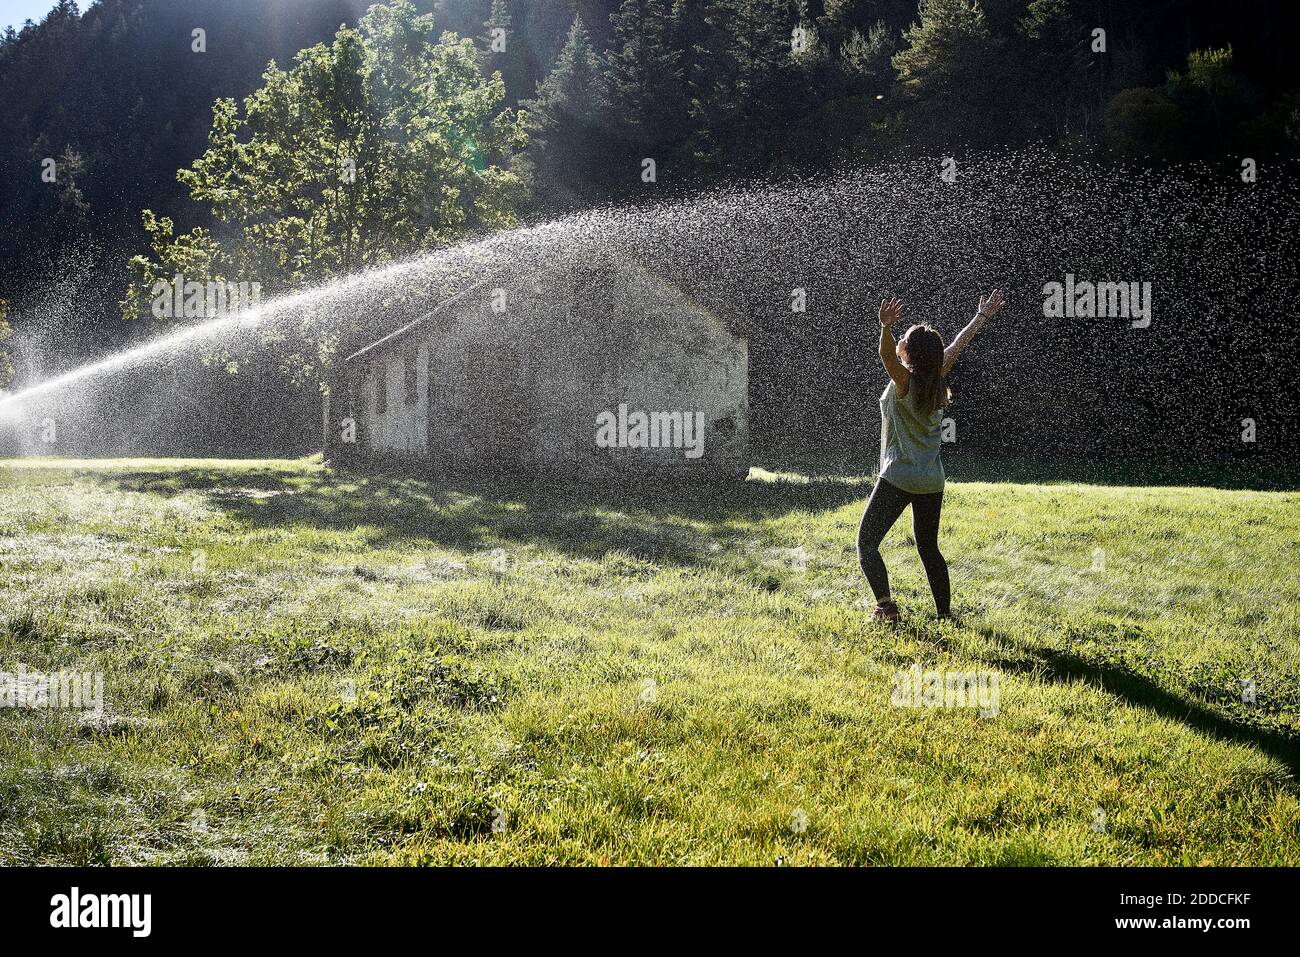 Woman standing in front of sprinkler on grass during sunny day Stock Photo